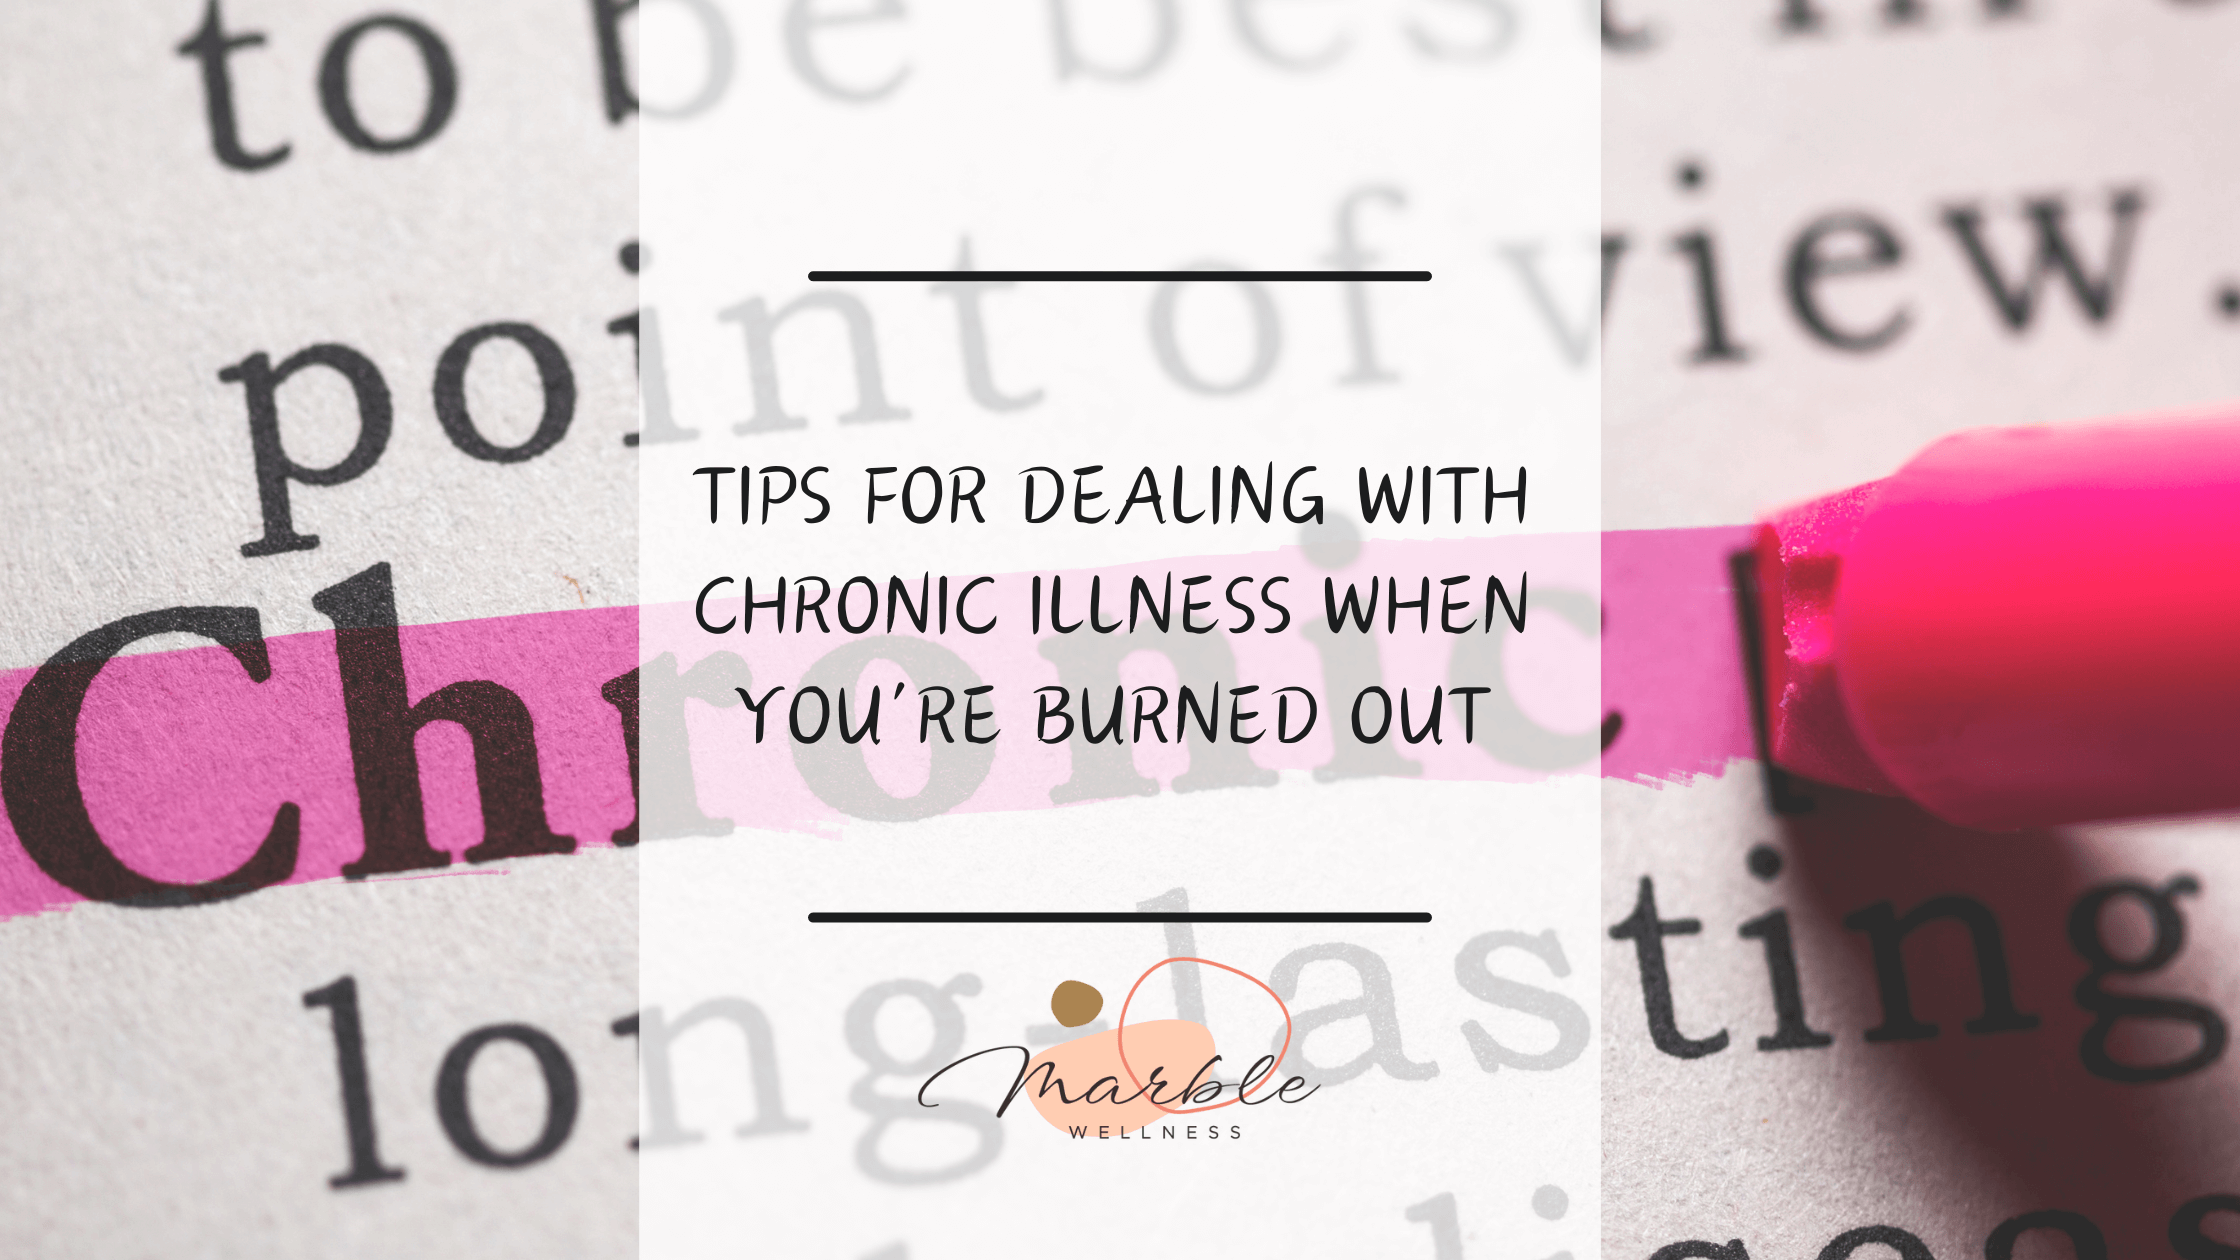 7 Tips for Dealing with Chronic Illness Burnout from a St. Louis Therapist